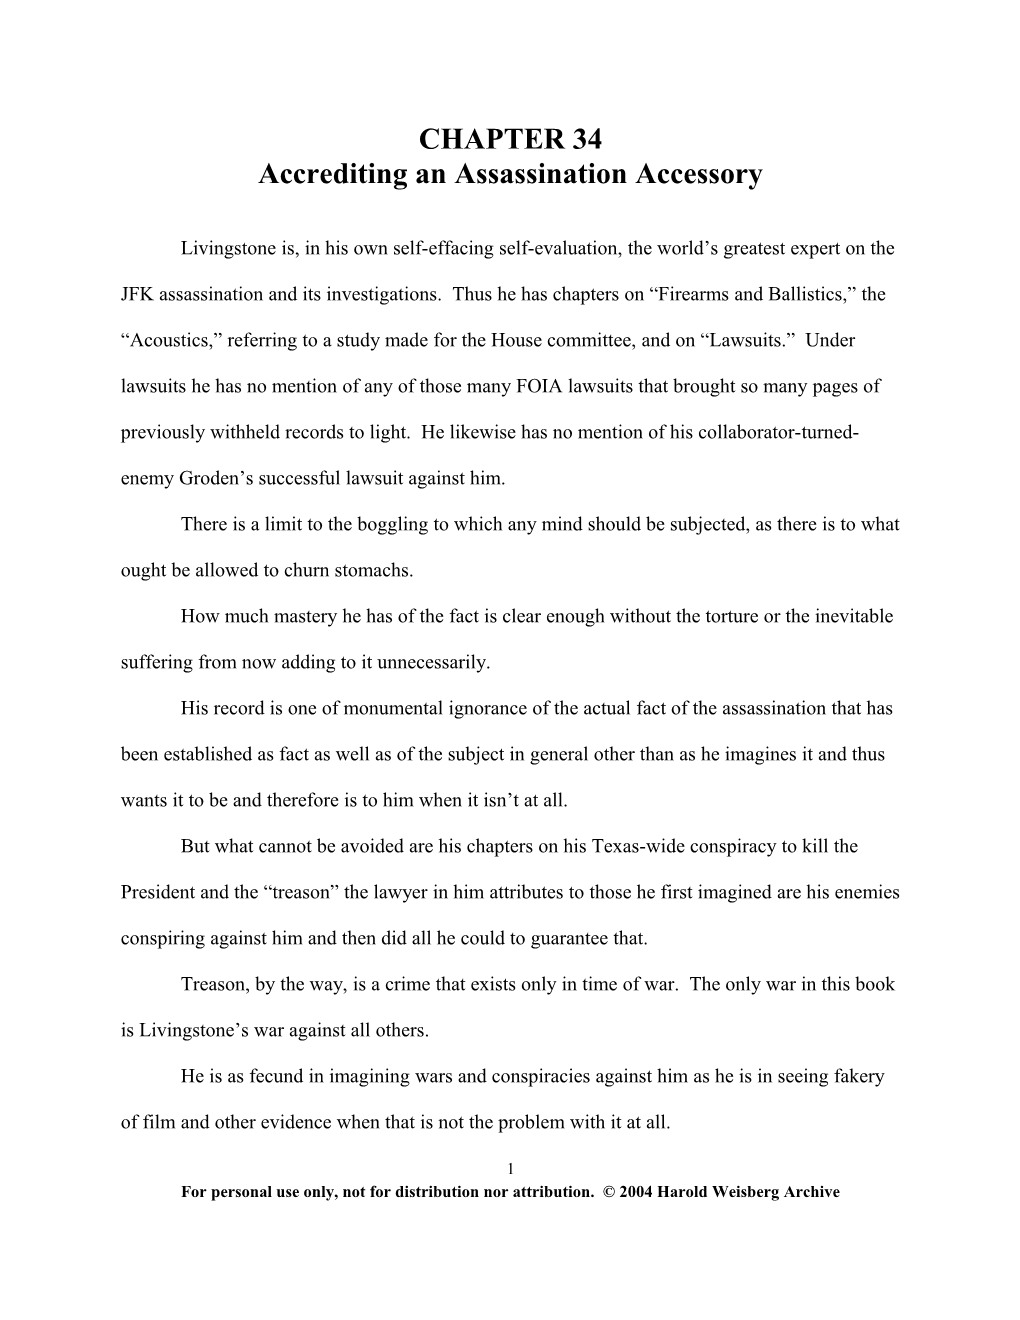 Accrediting an Assassination Accessory